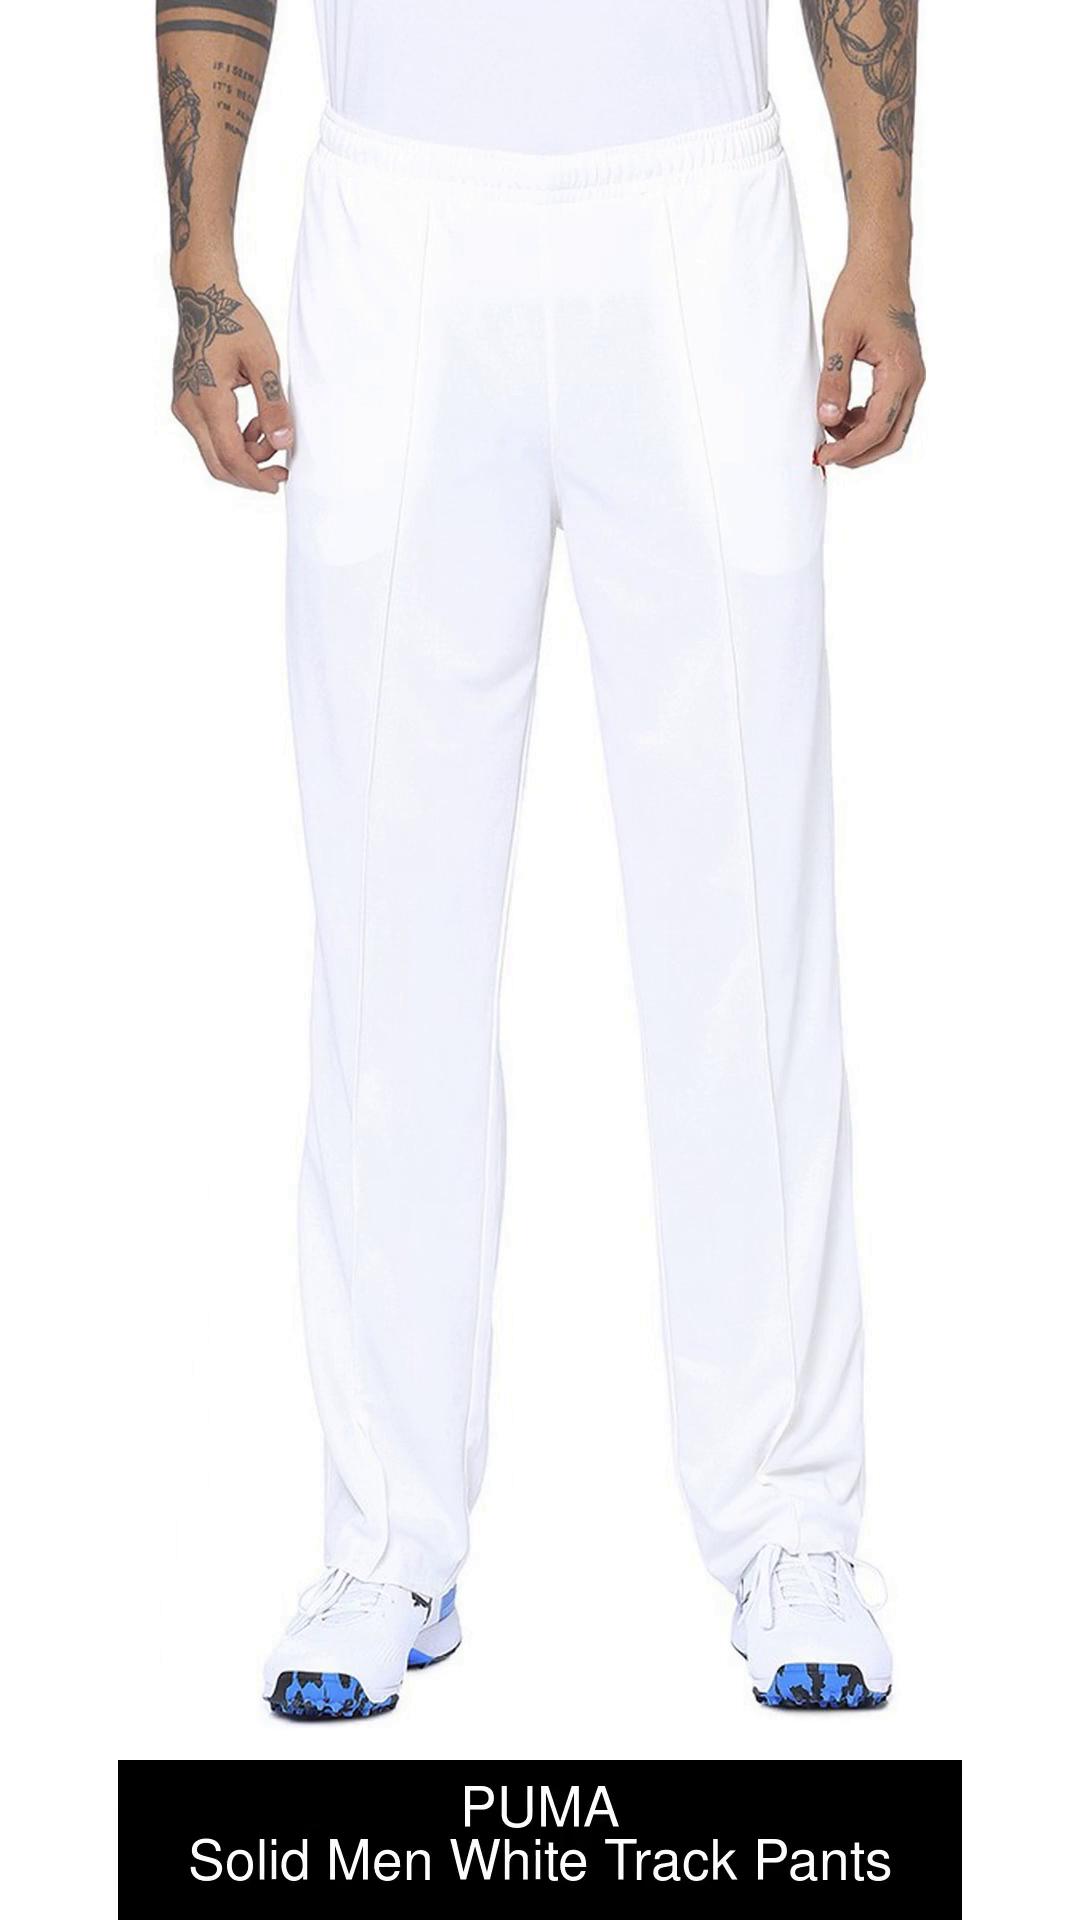 Buy Men OffWhite Century 20 Cricket Track Pant From Fancode Shop